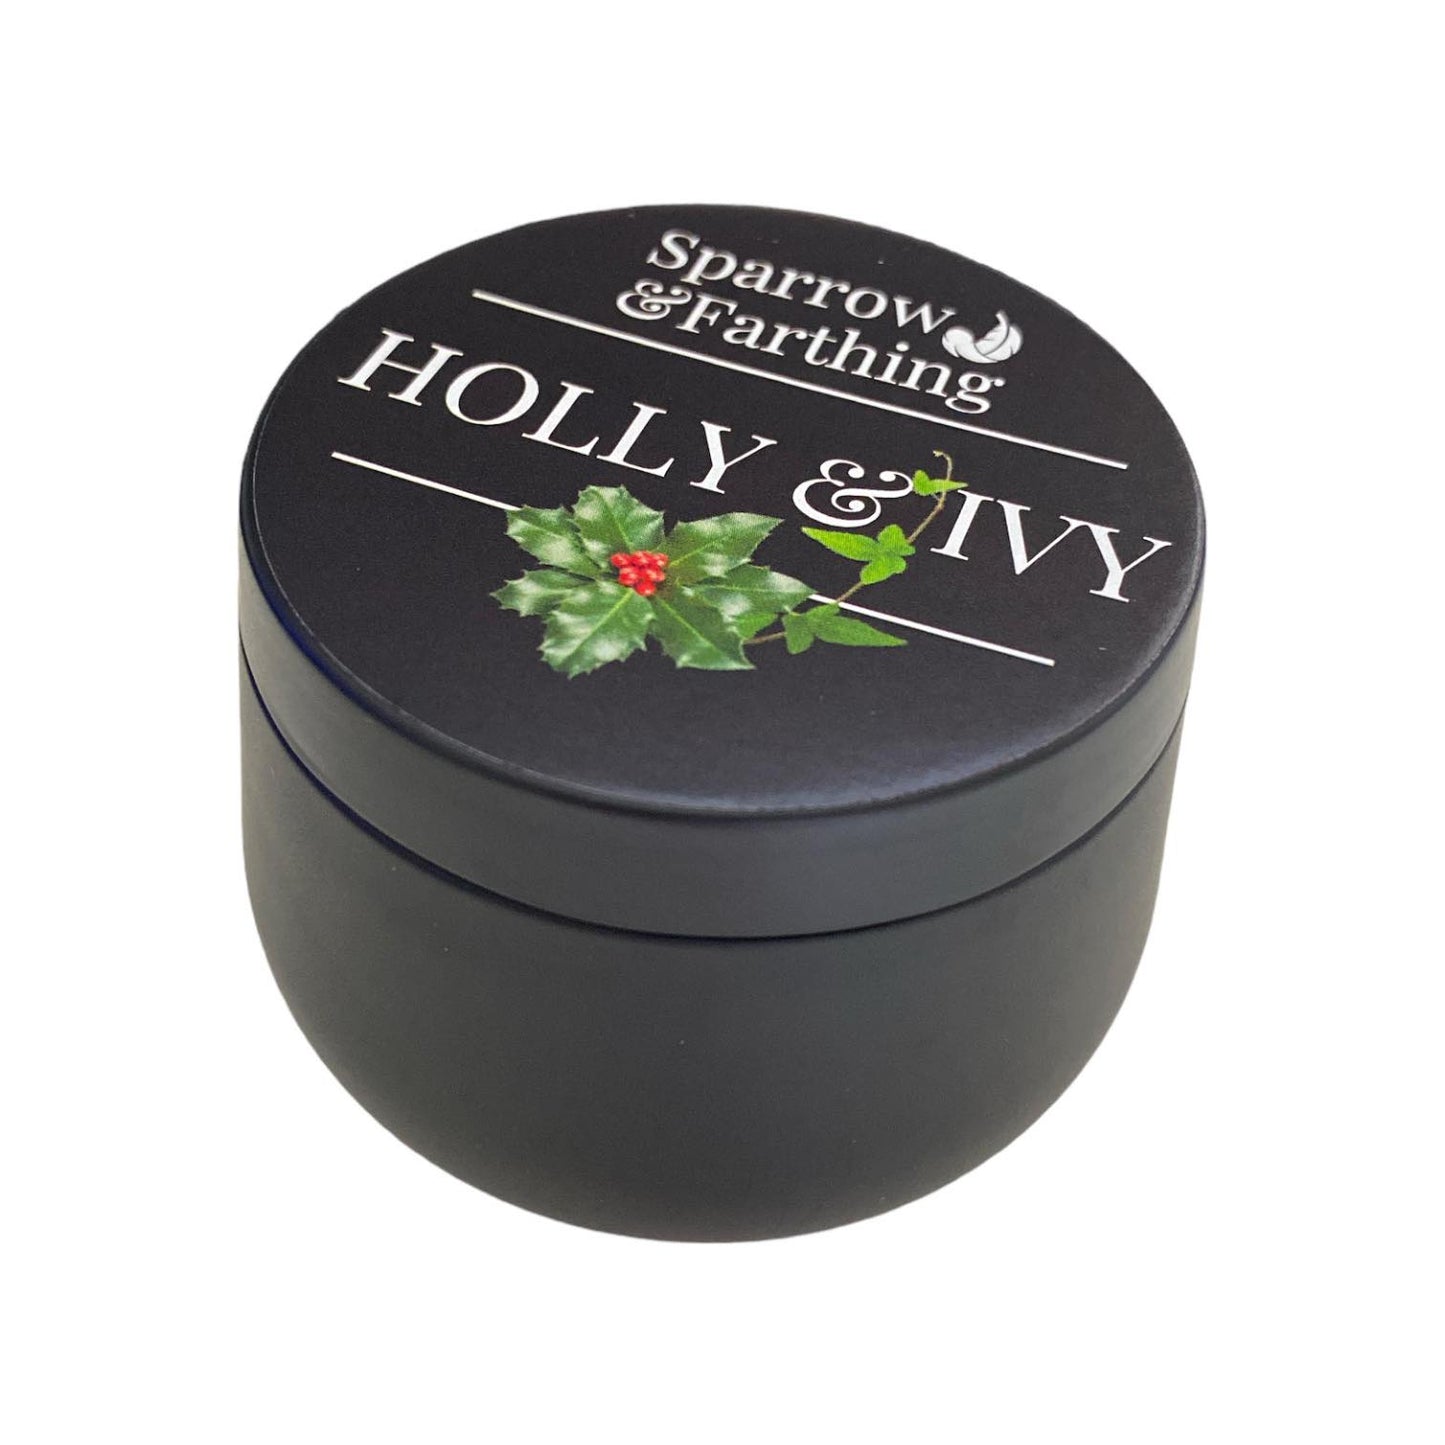 Holly & Ivy Candle